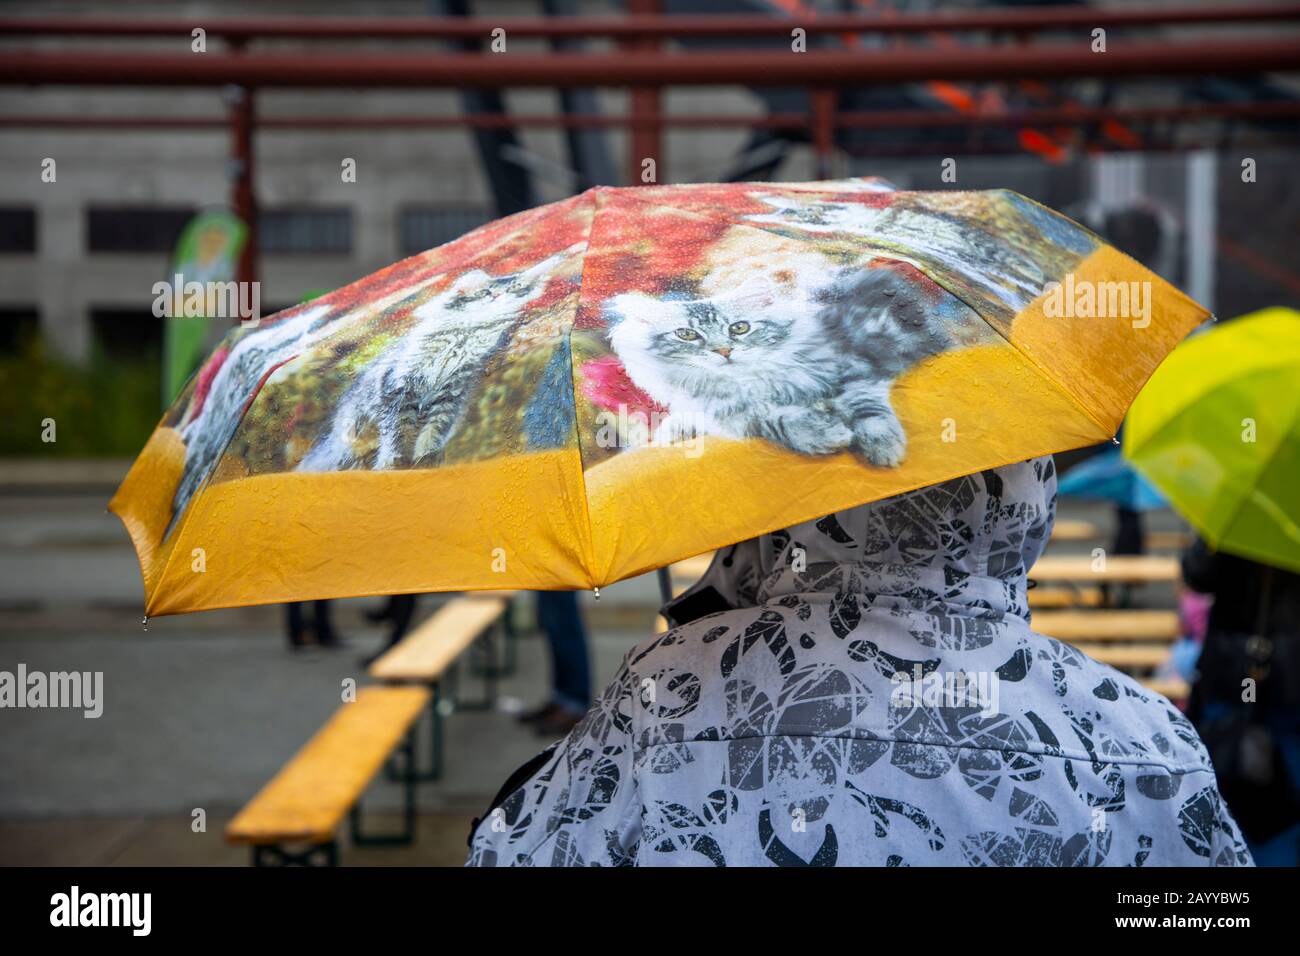 Woman with an umbrella with cat motives, Stock Photo